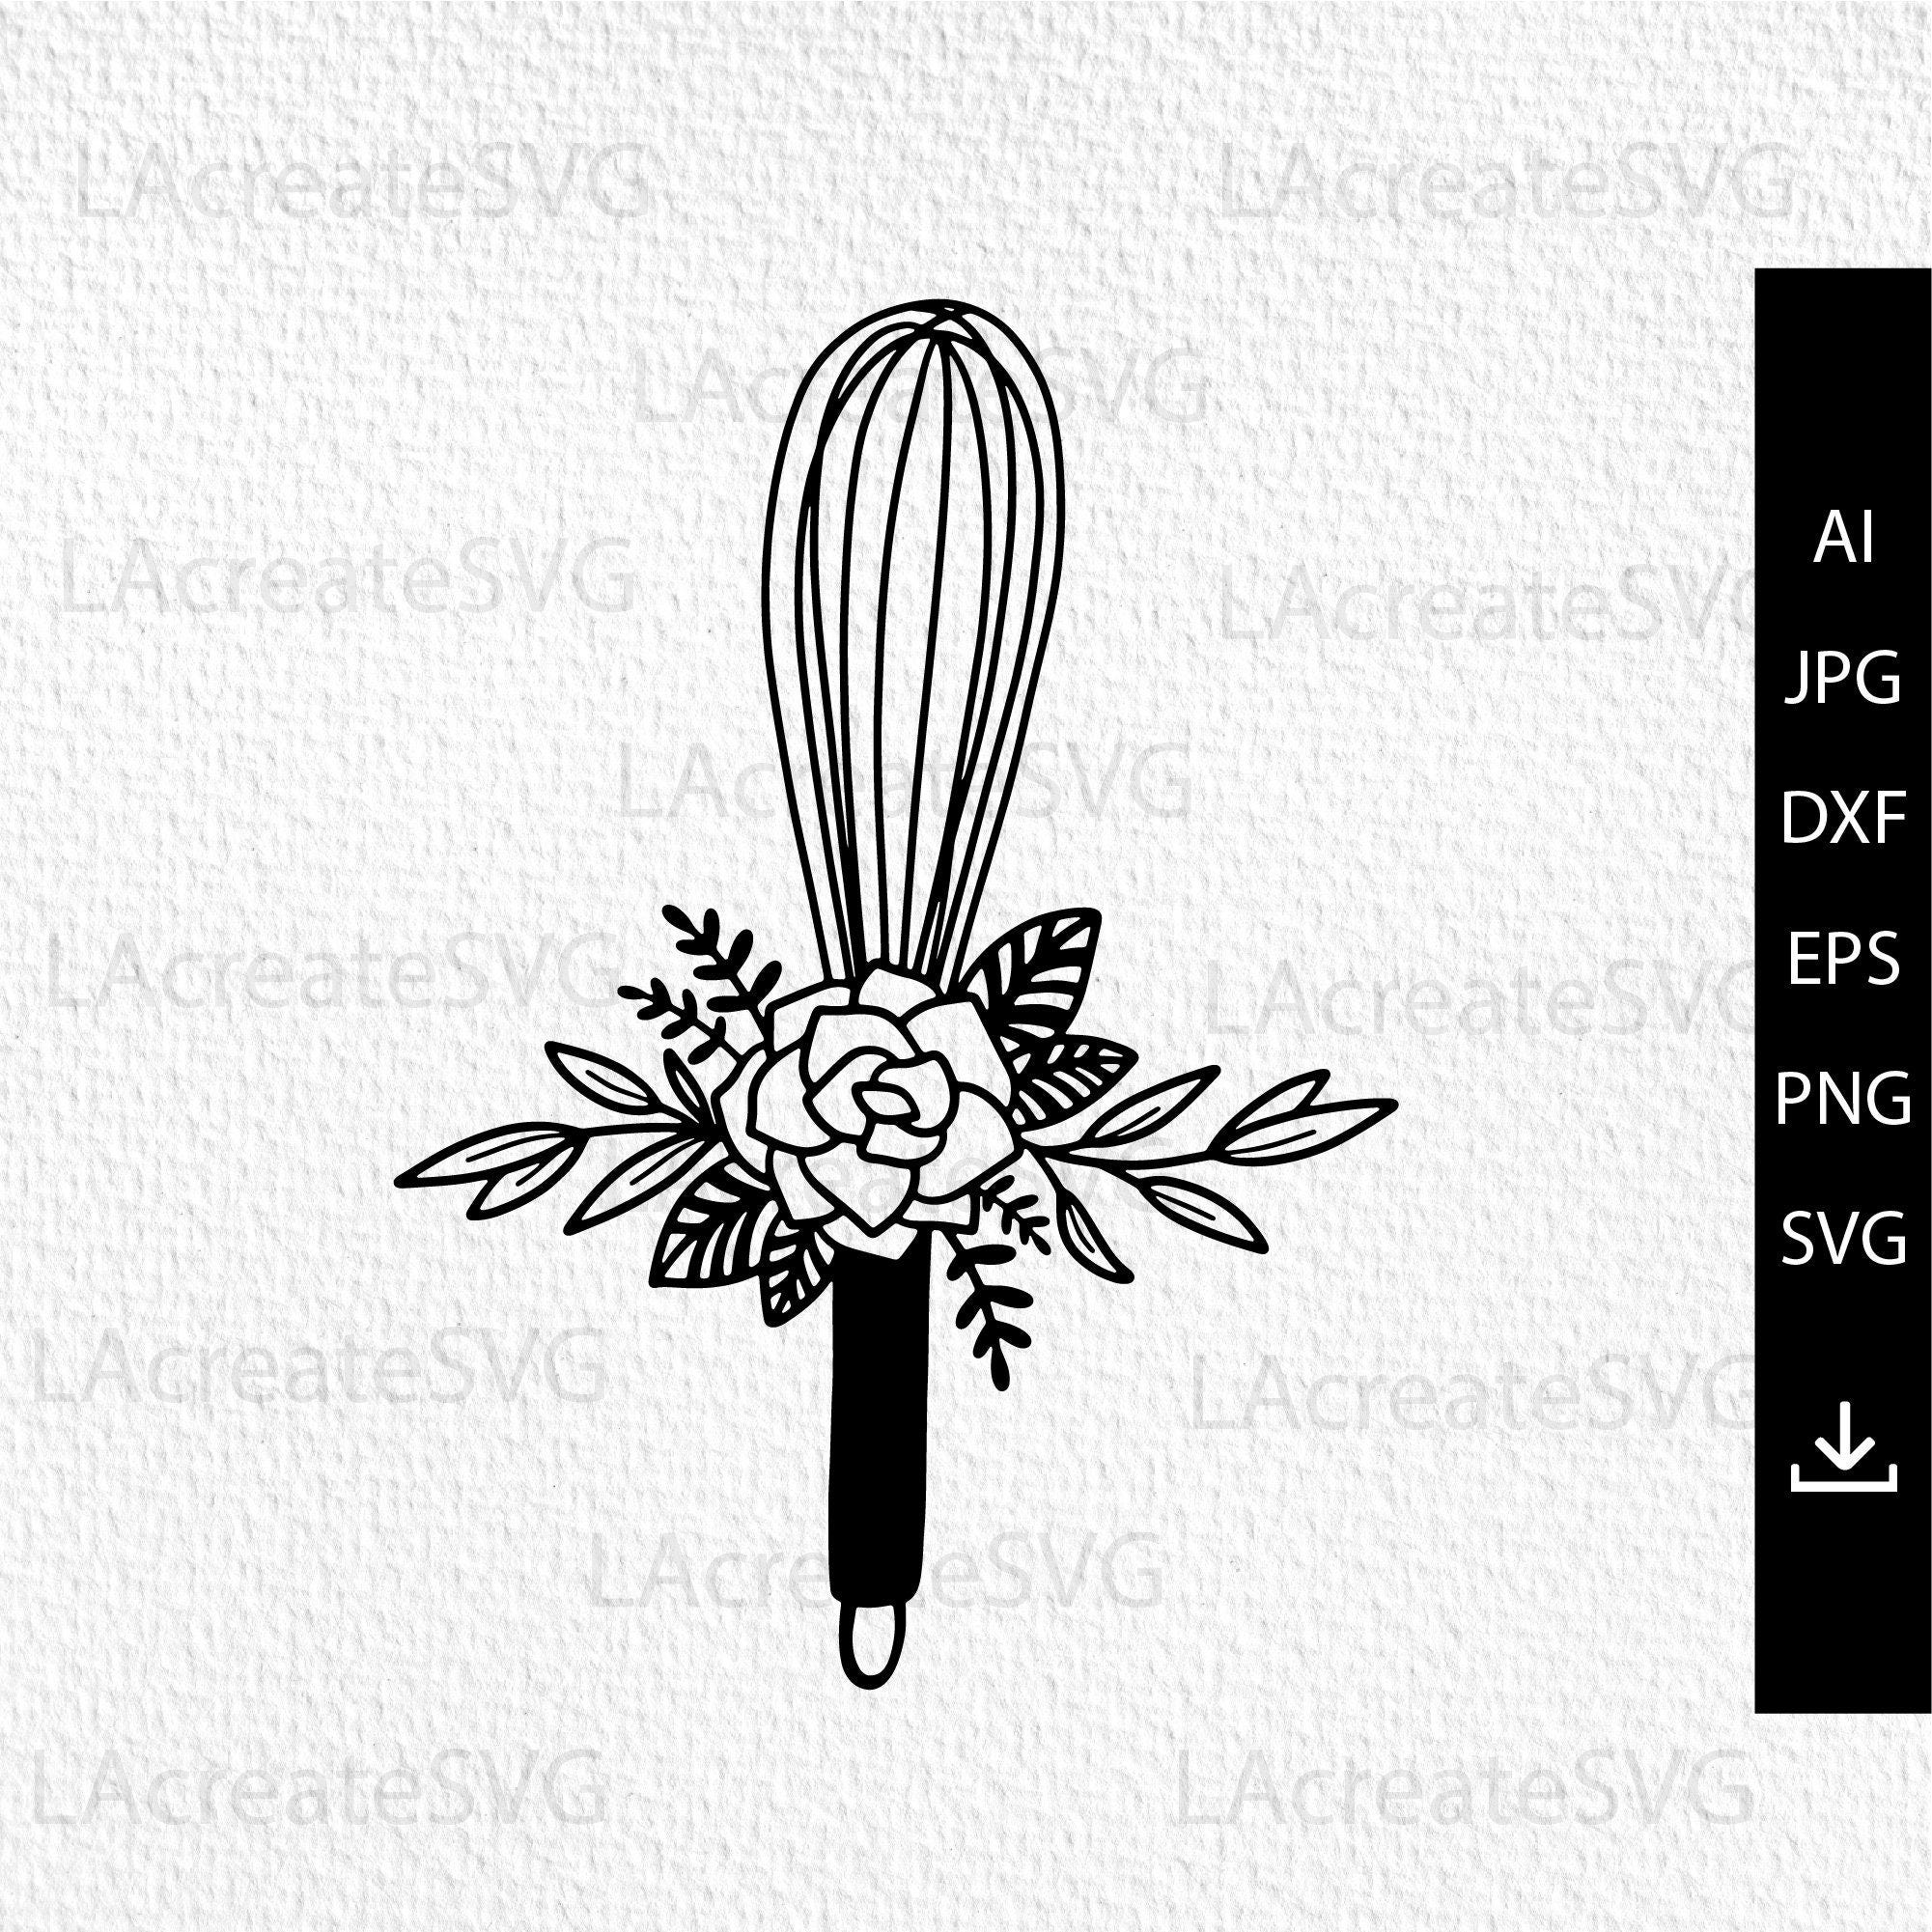 Baking whisk svg, Cooking svg, Kitchen clipart, Kitchen utensil svg, Floral Whisk svg, Baking apron design svg, Cut File Silhouette